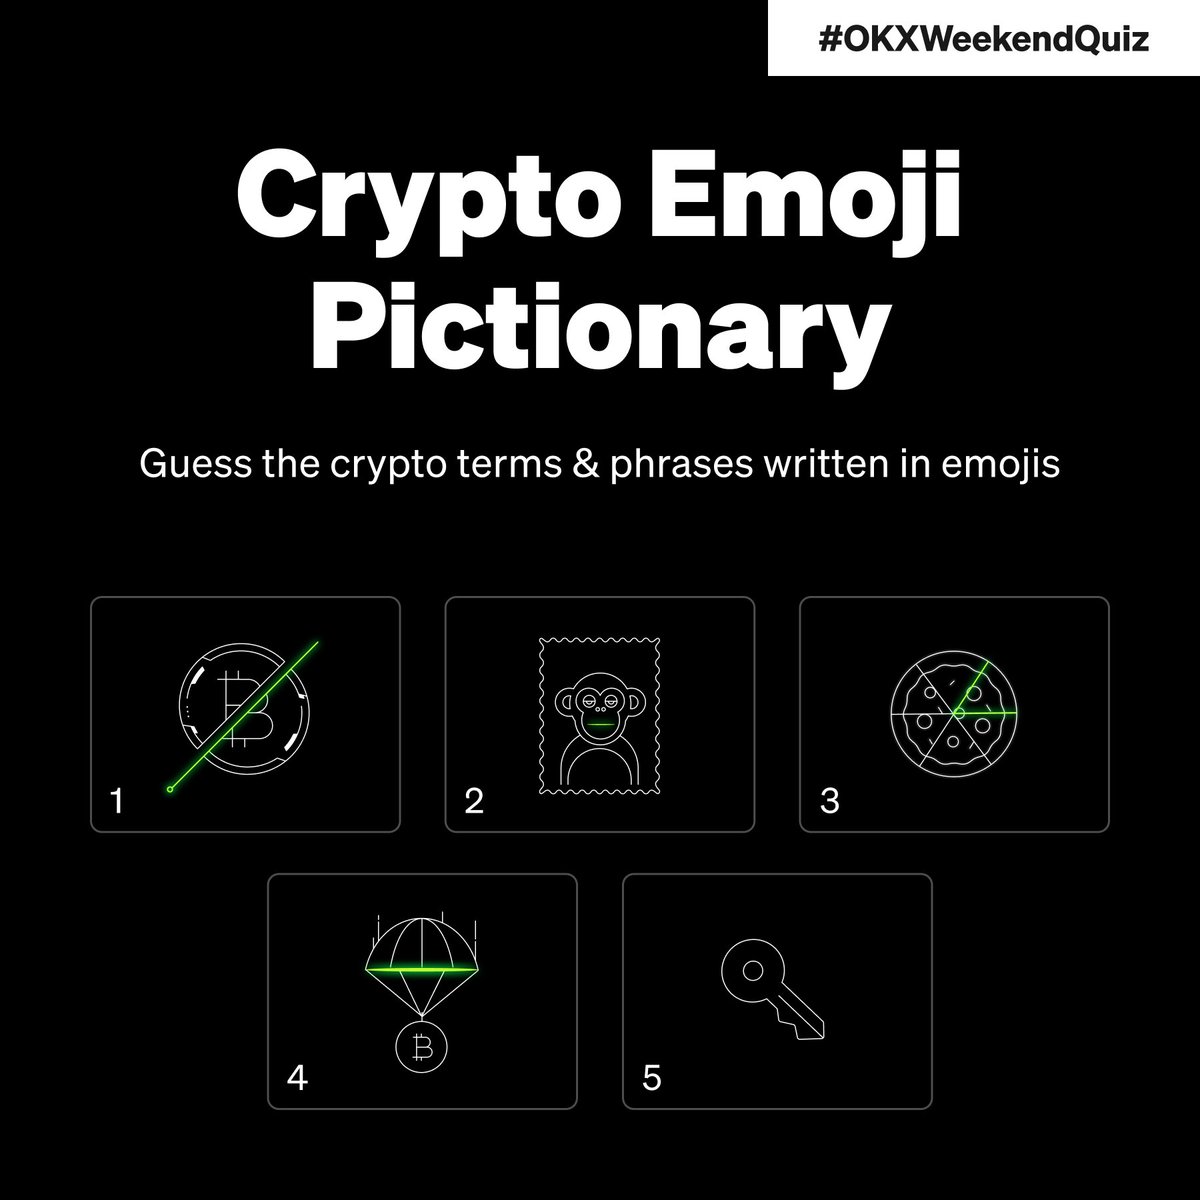 👋 Win 5️⃣0️⃣0️⃣ USDT with the #OKXWeekendQuiz  🎉

Enter now:
⚫️ Follow @okx
⚫️ RT + comment your answer
⚫️ Fill: giv.gg/quiz146